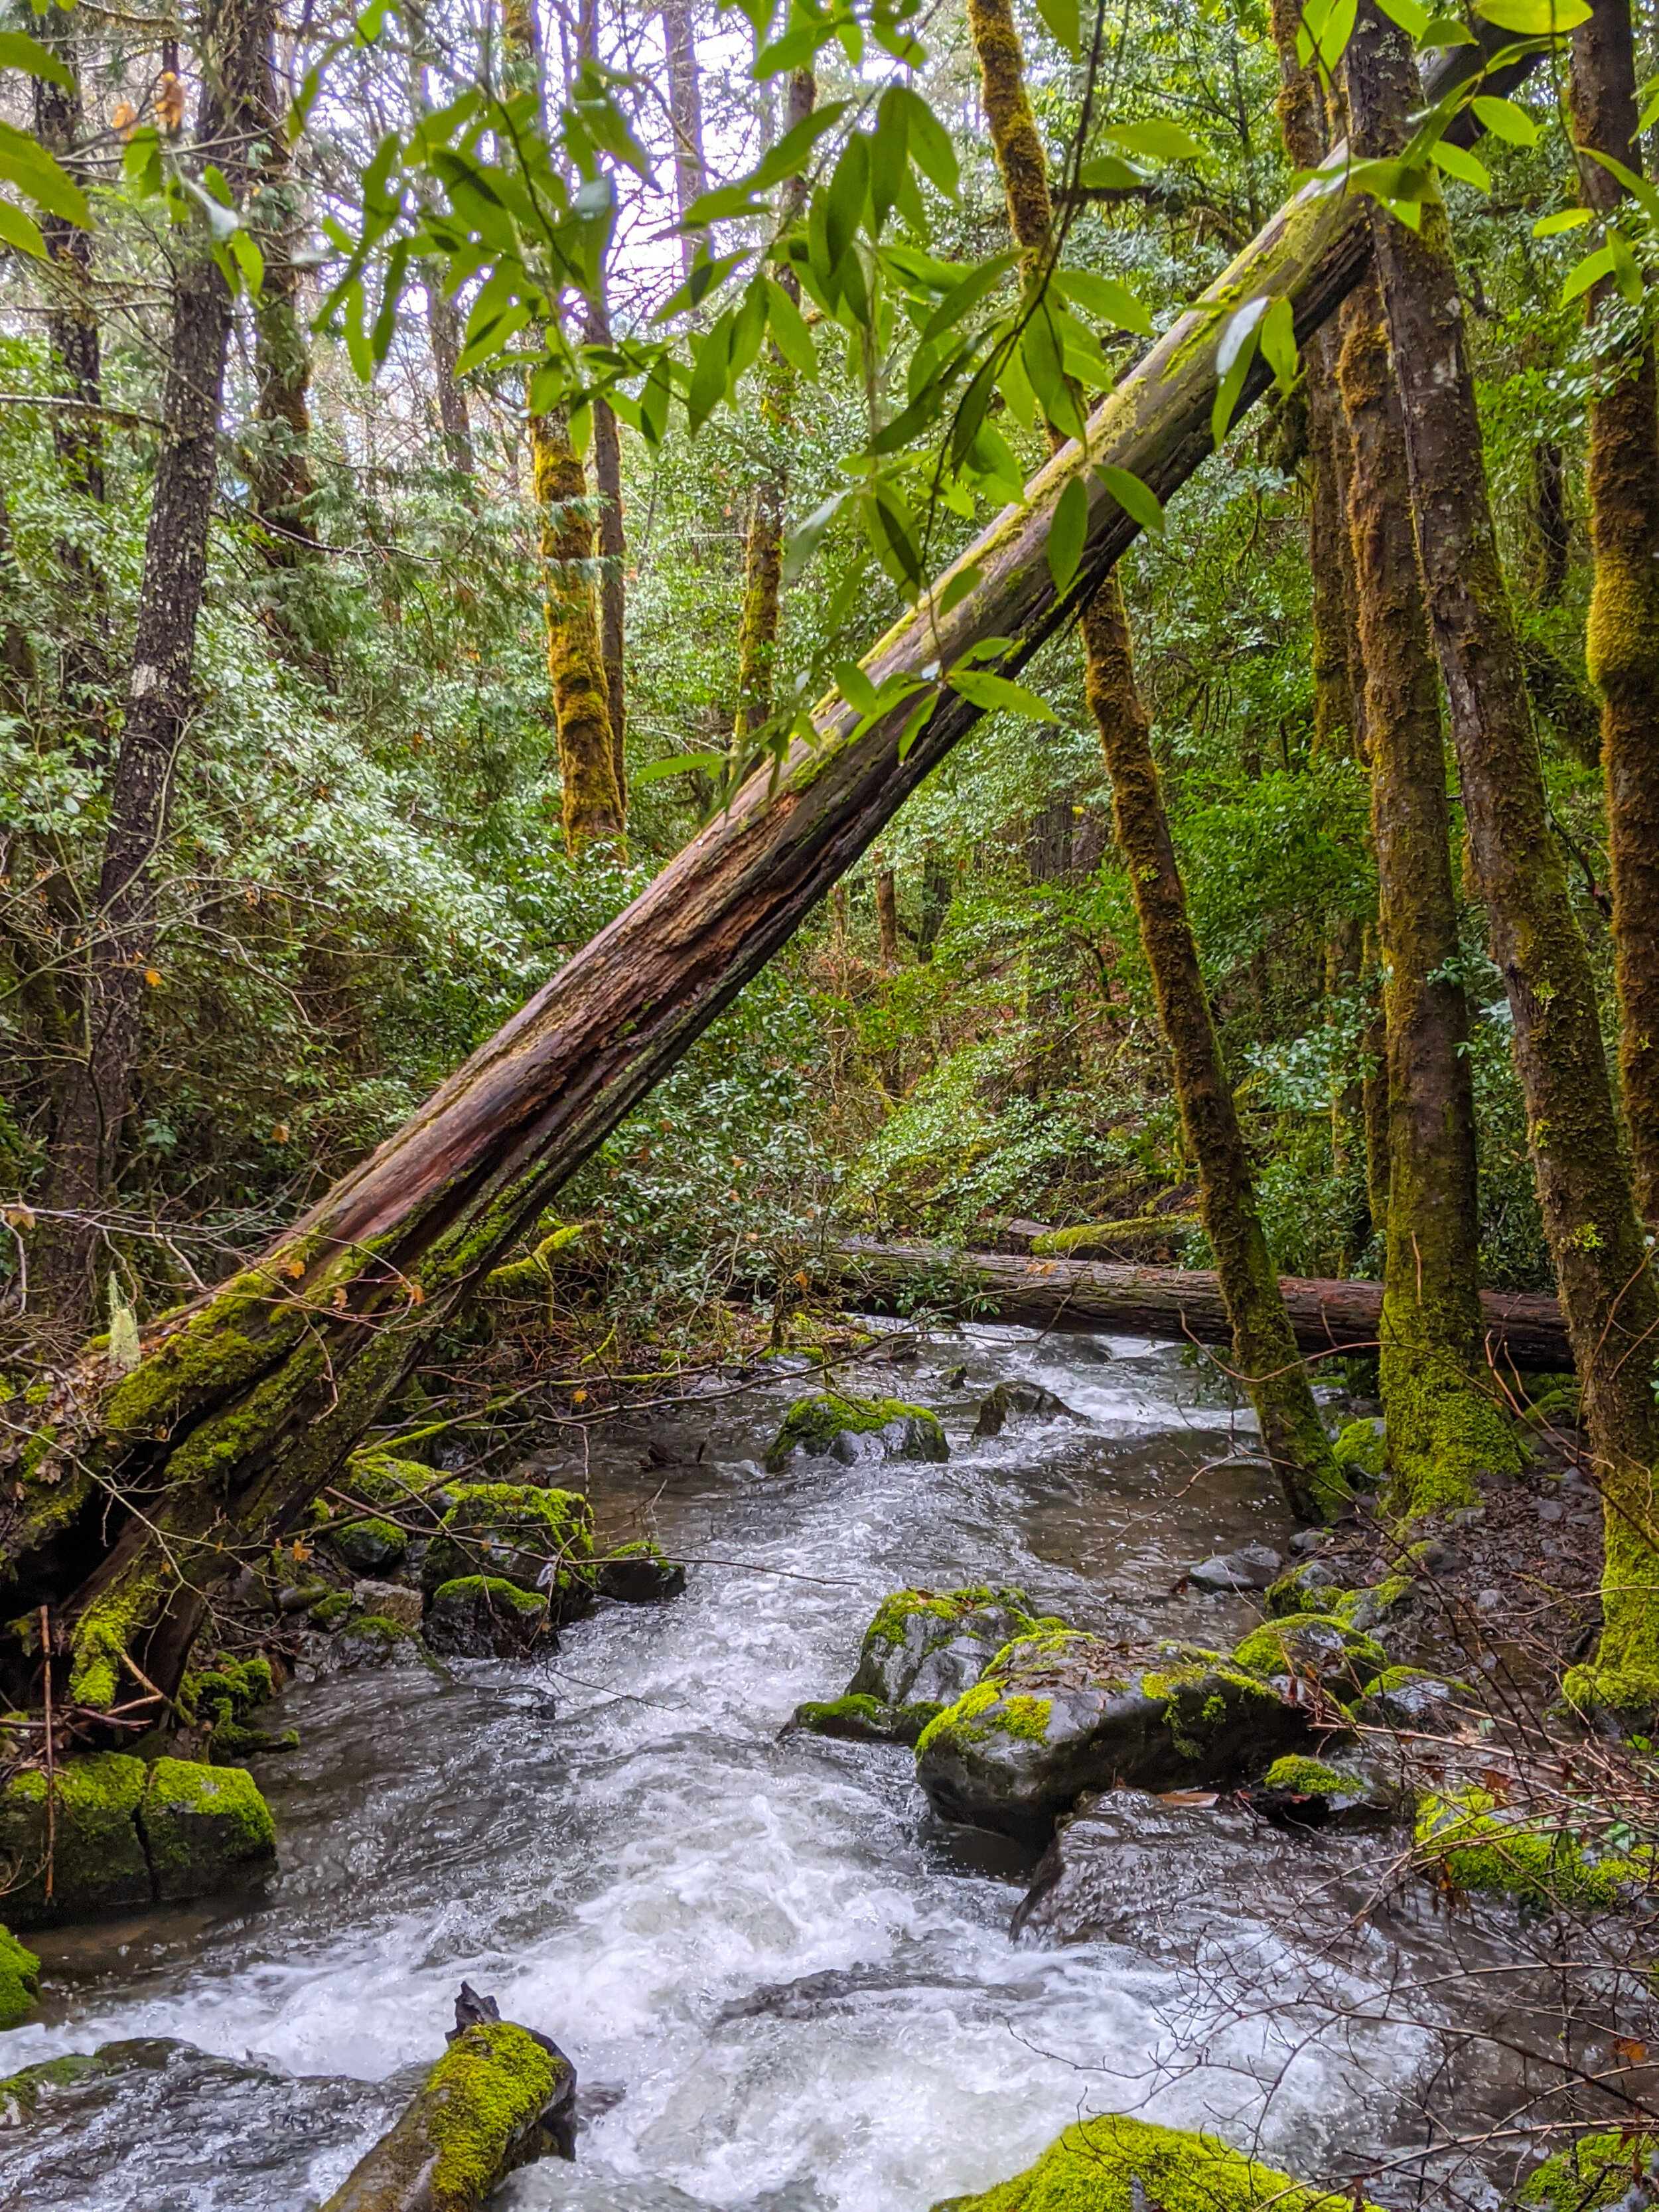 Limpy Creek Botanical Interpretive Loop Trail - Grants Pass - What to do in Southern Oregon - Hikes